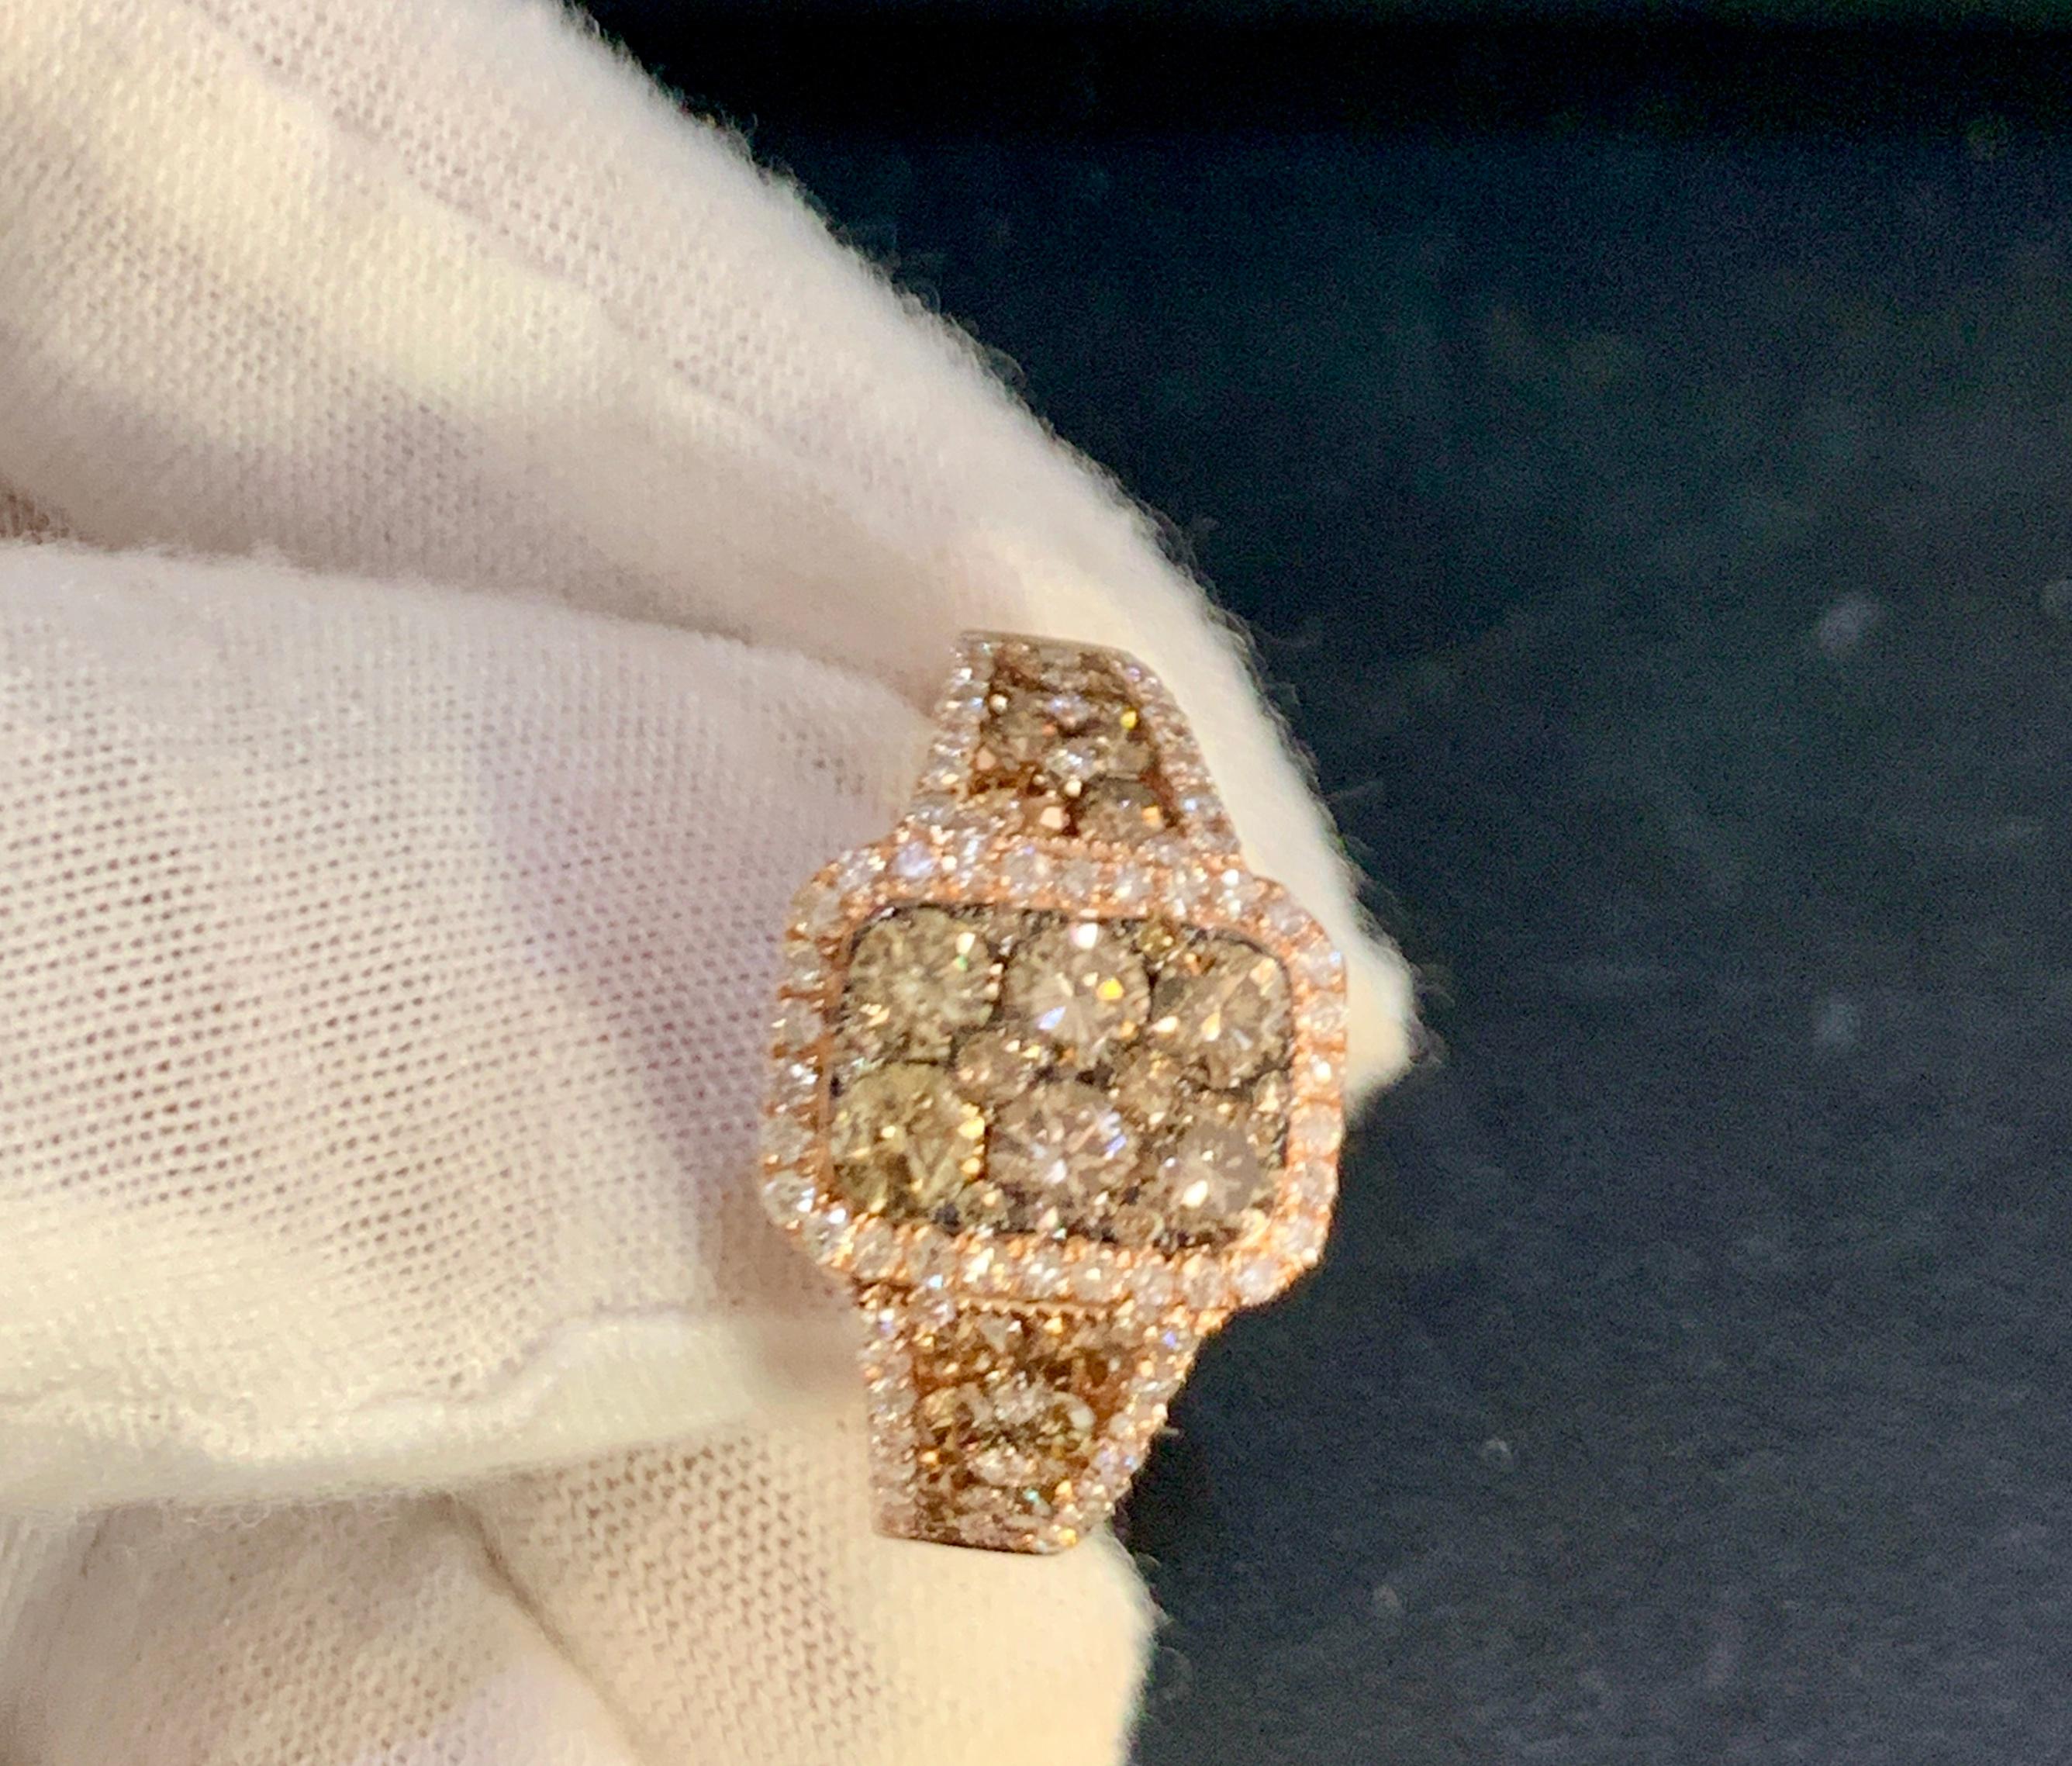  Designer Effy'S 1.8 Carat Diamond  Cocktail Ring 14 Karat Rose Gold Ring
Champagne and White diamond ring in Rose or pink Gold
Total  Approximately 1.80  Brilliant cut round diamonds 
Sparkle is unbelievable.
Diamond SI to VS  quality and G/H